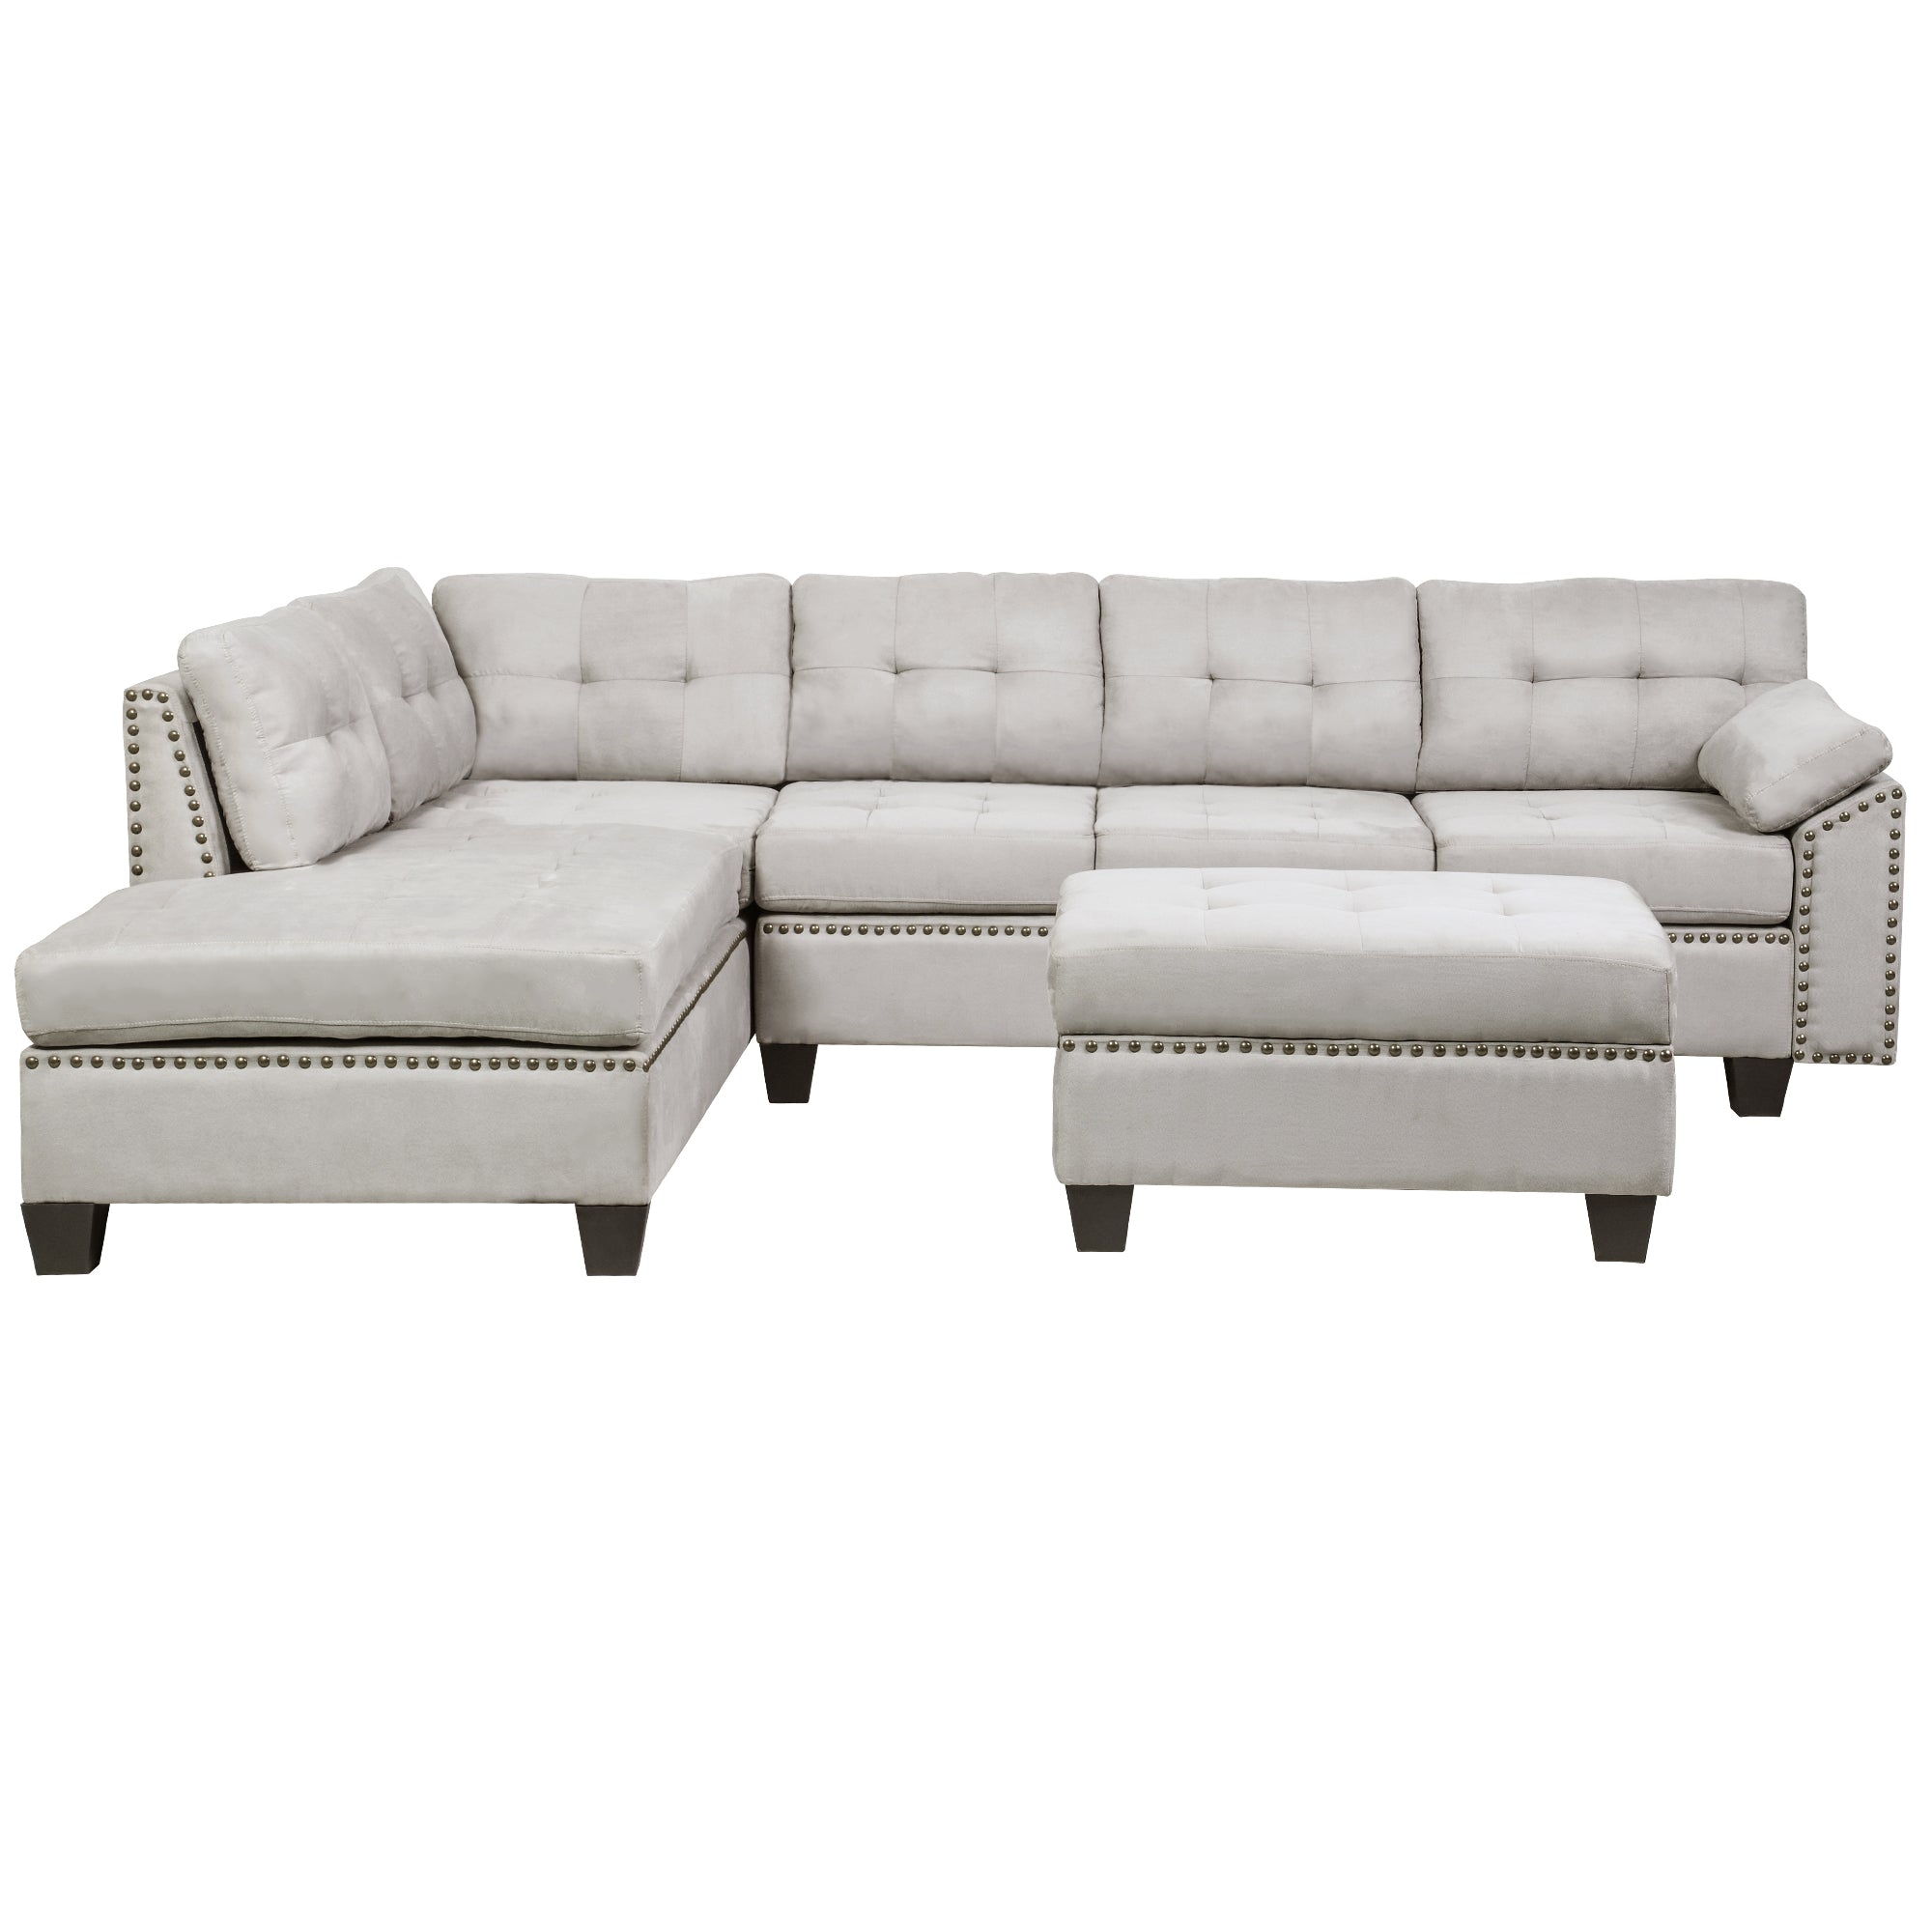 Sectional Sofa Set with Chaise Lounge and Storage Ottoman Nail Head Detail (Grey)-Boyel Living